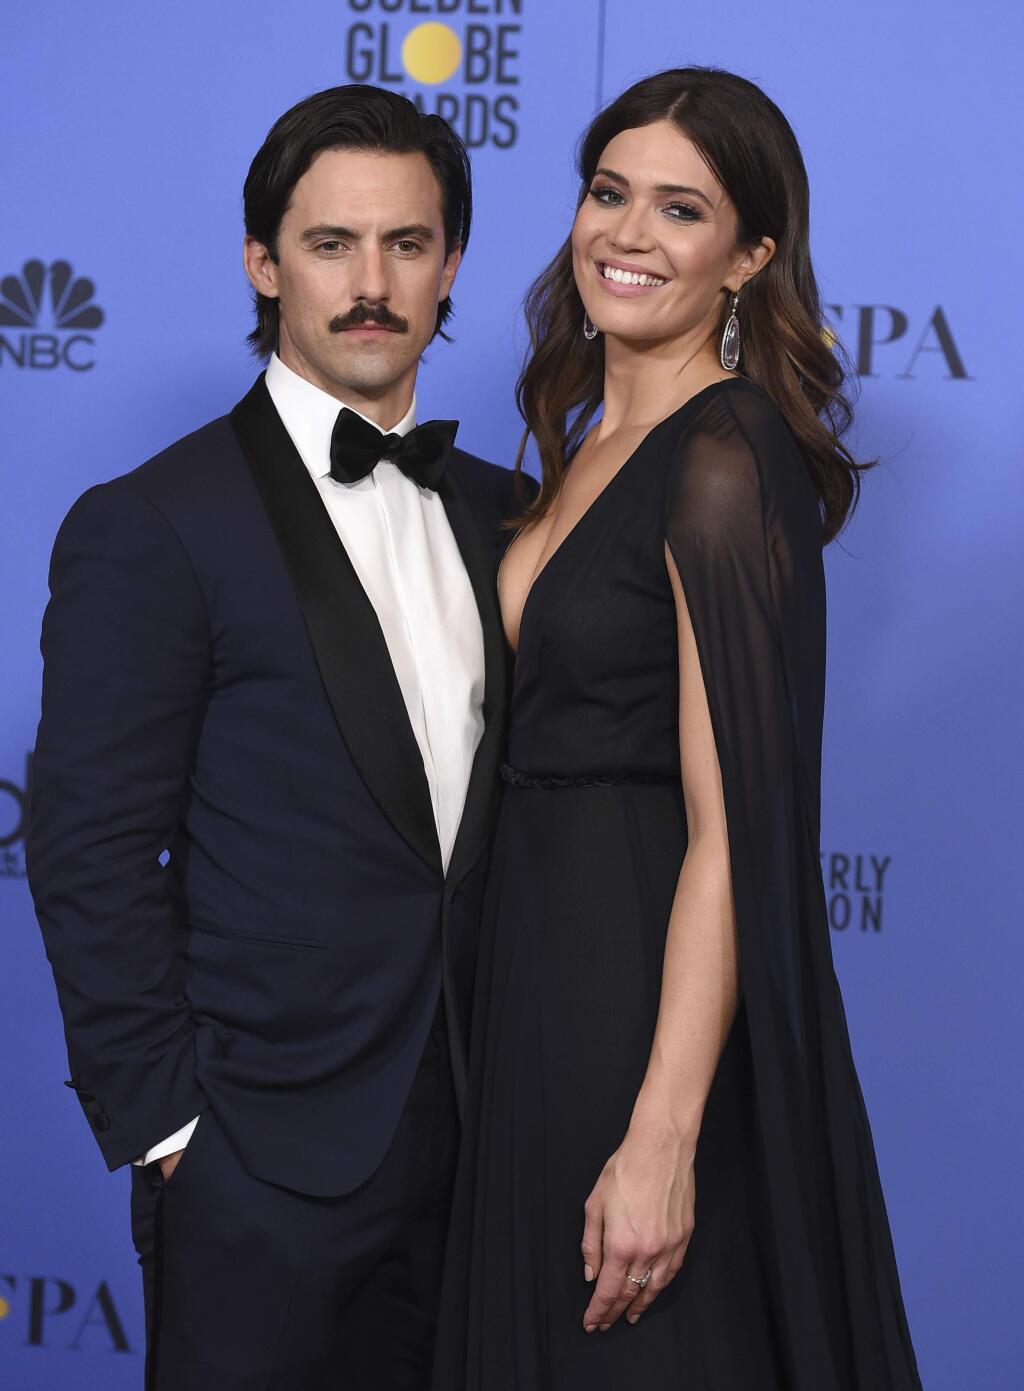 FILE - This Jan. 8, 2017 file photo shows Milo Ventimiglia, left, and Mandy Moore in the press room at the 74th annual Golden Globe Awards in Beverly Hills, Calif. The season finale for the popular time-twisting family drama will air Tuesday at 9 p.m. EST on NBC. (Photo by Jordan Strauss/Invision/AP, File)